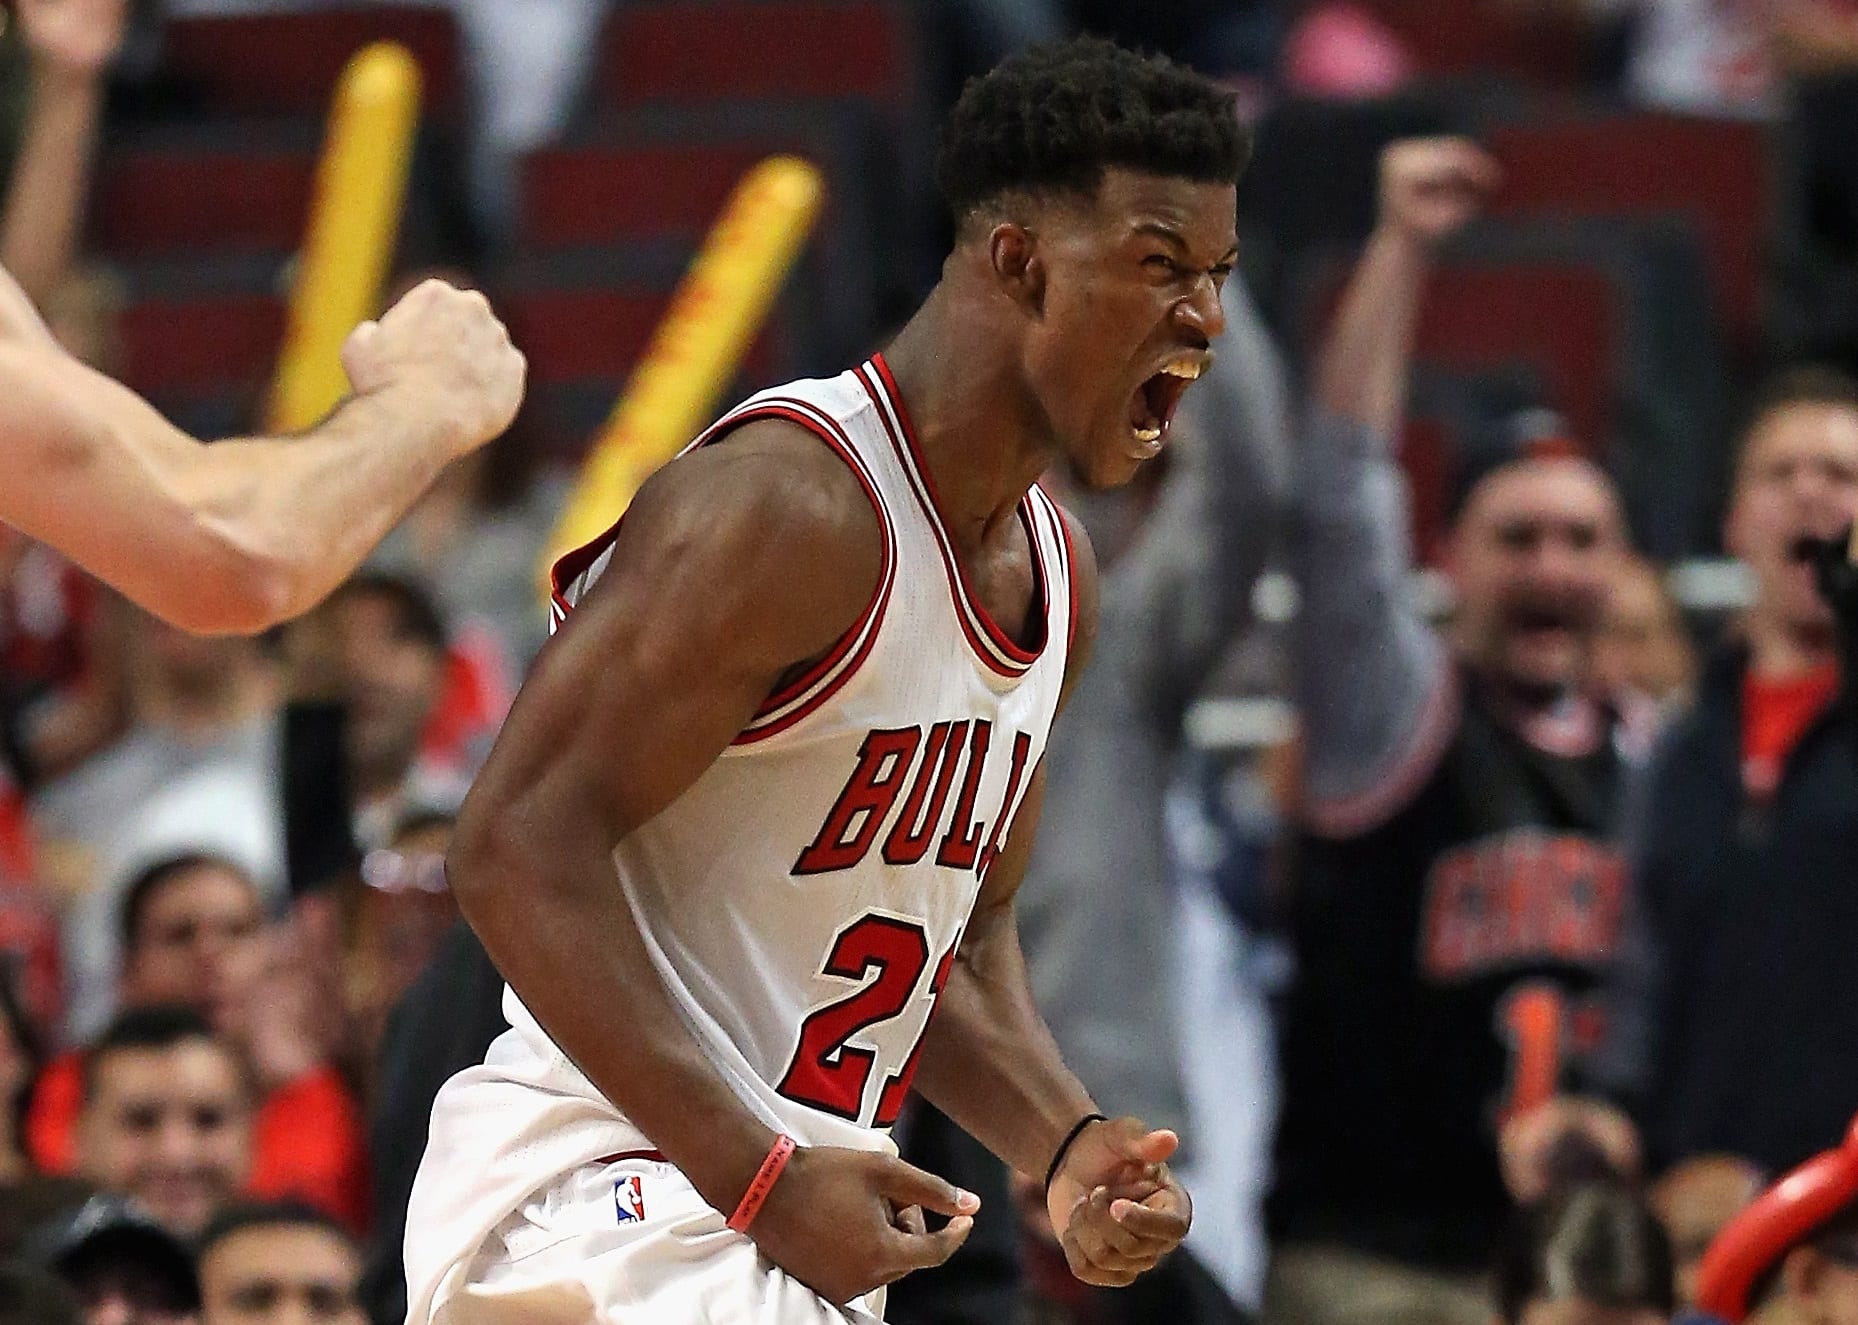 Jimmy Butler After NBA Finals Loss: 'We'll be back' - The Source